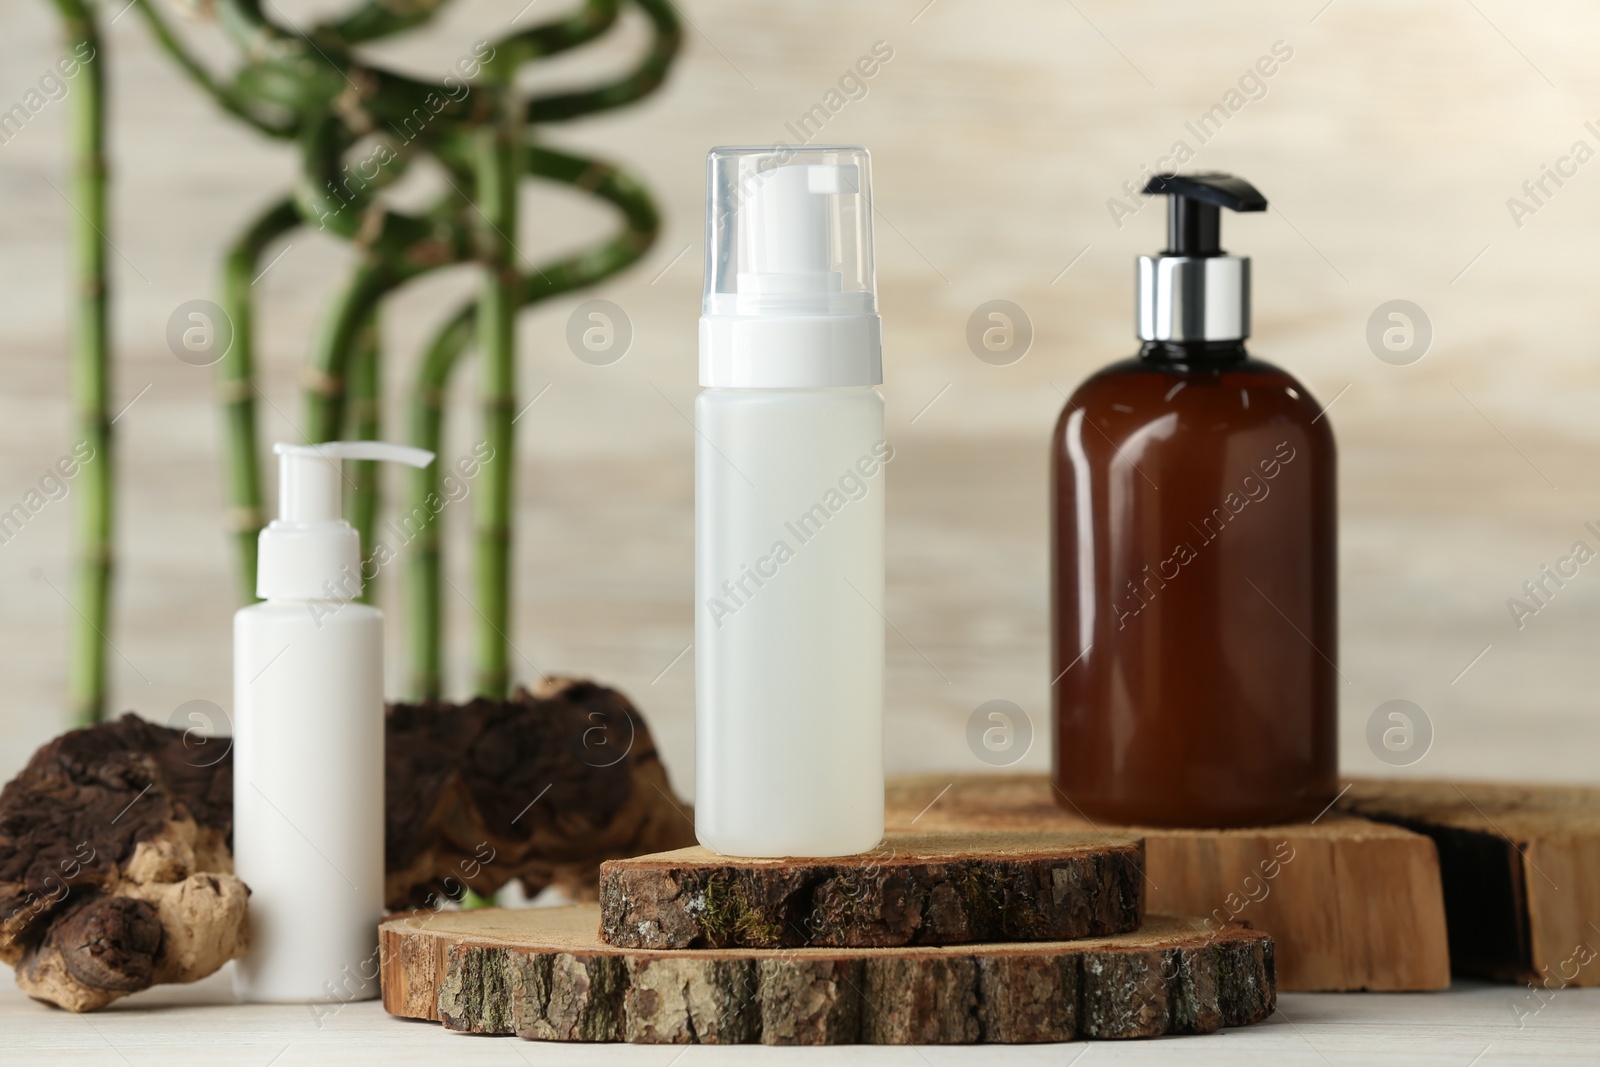 Photo of Bottles of face cleansing products on white table